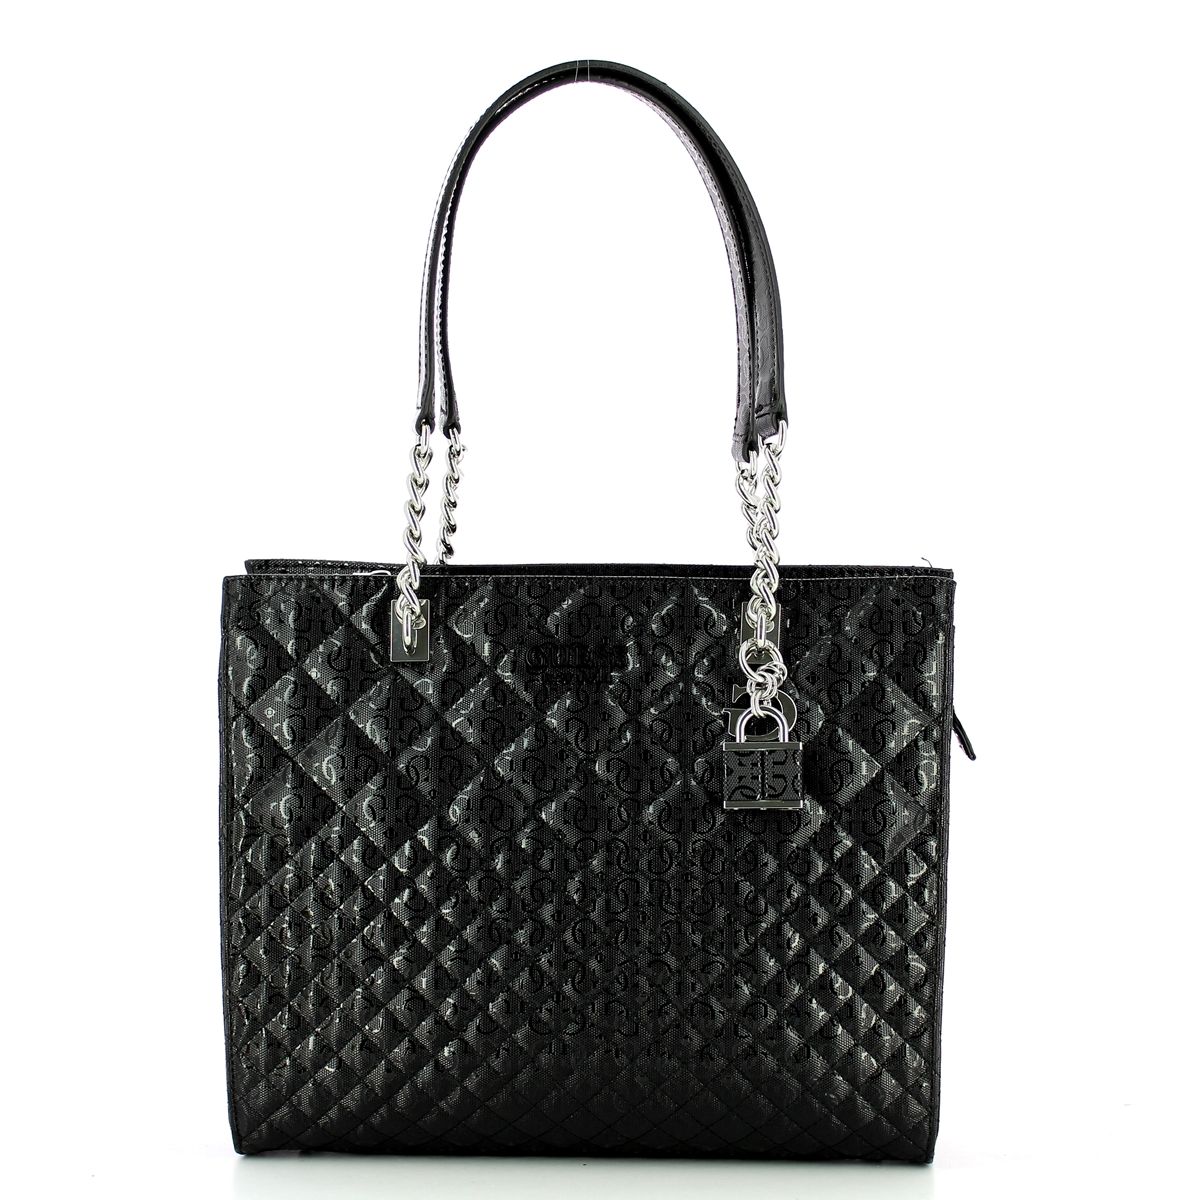 Queenie 4G Tote Bag Guess, glamorous quilted faux leather, with zipped compartment, back pocket, and inner lining.